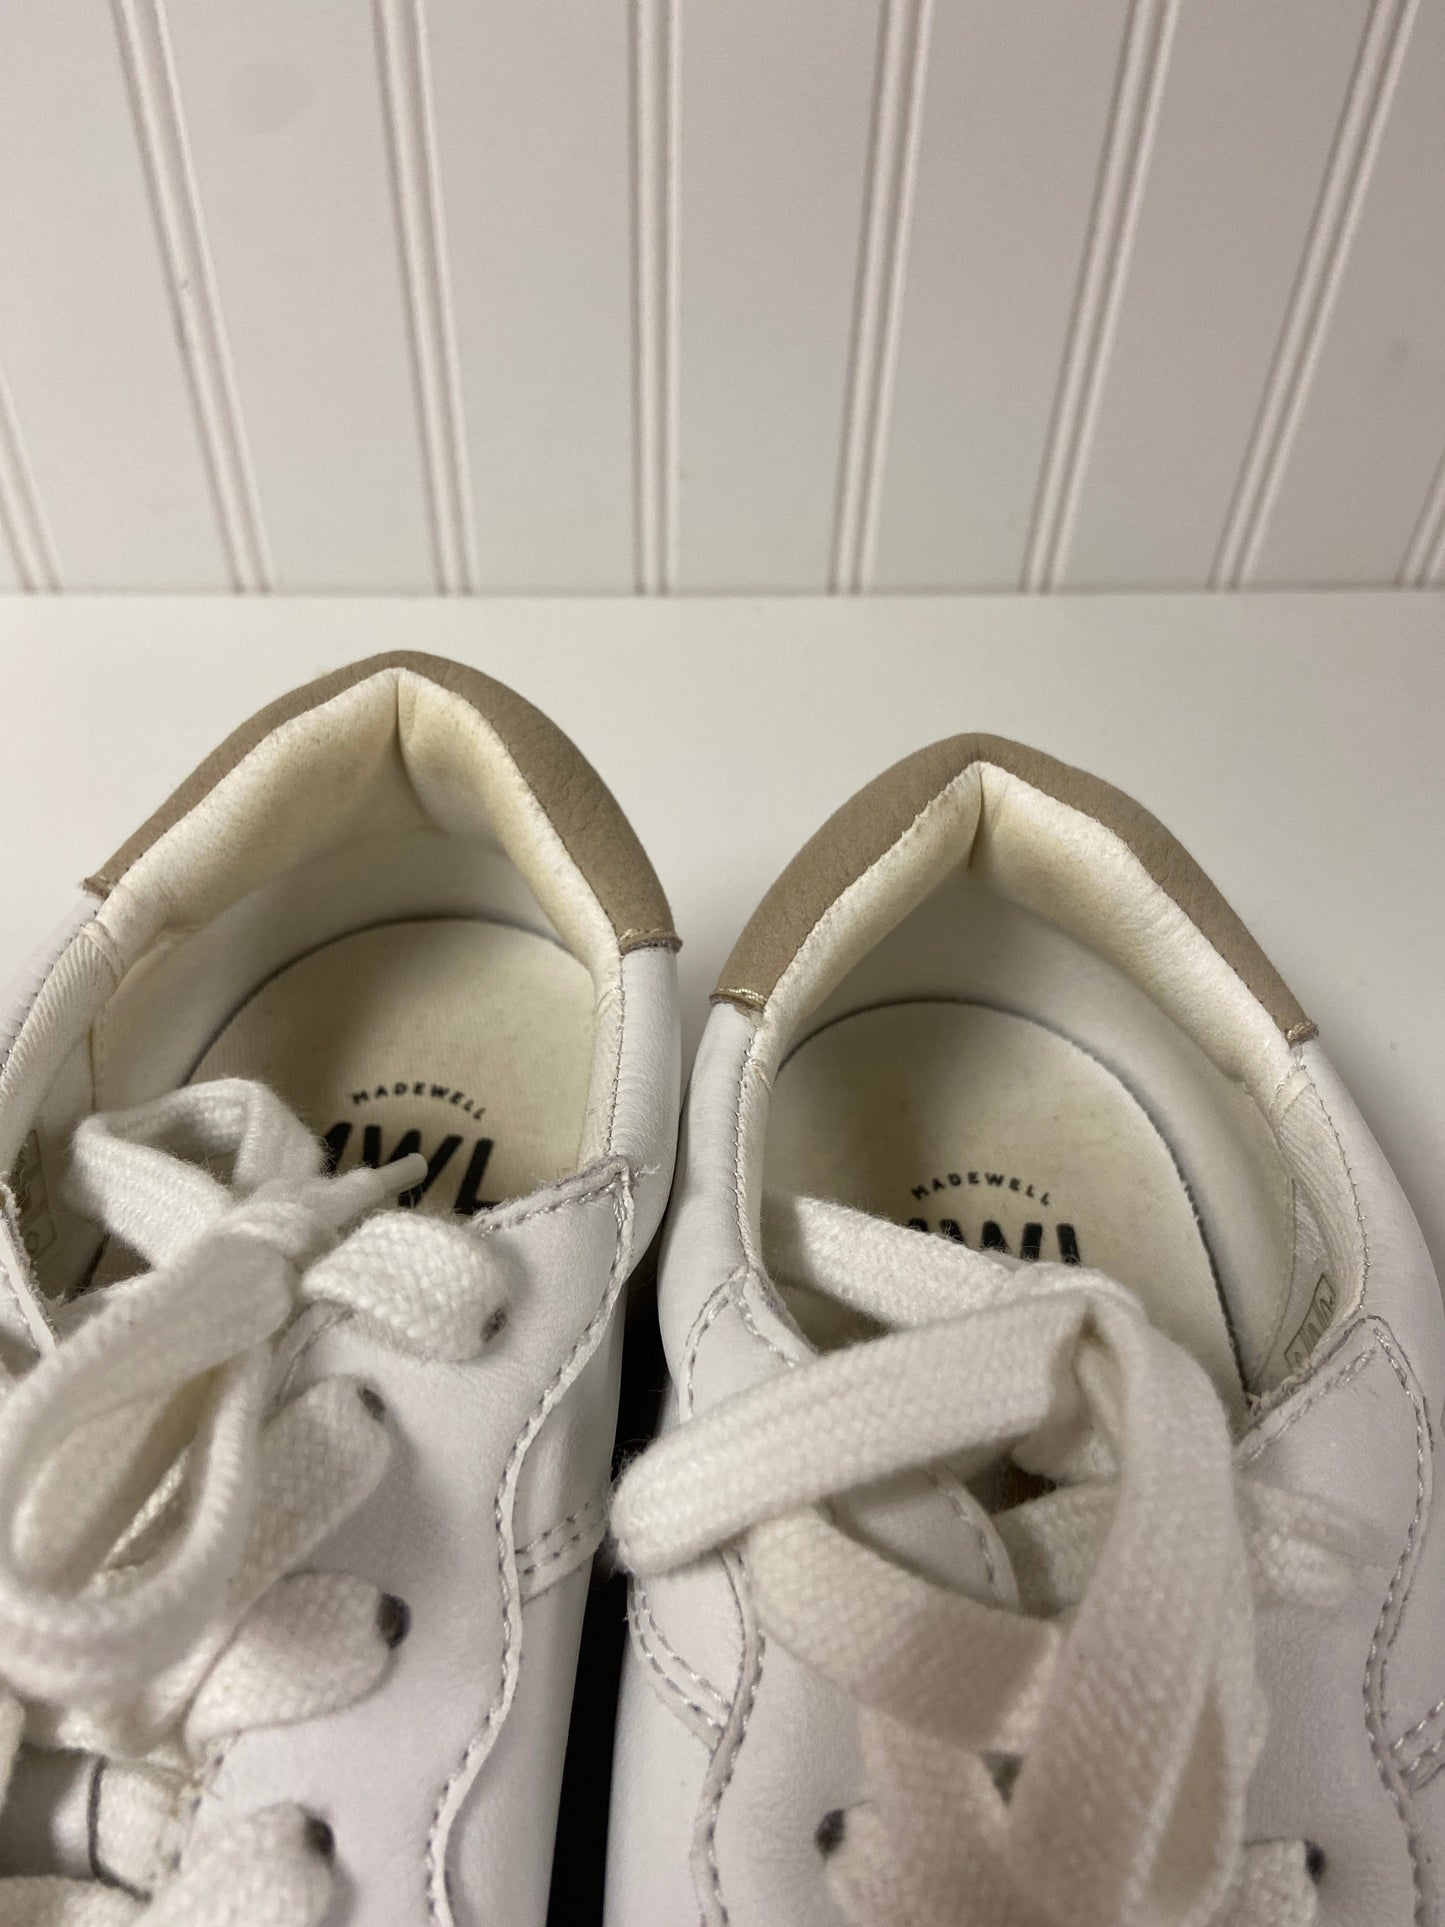 White Shoes Sneakers Madewell, Size 8